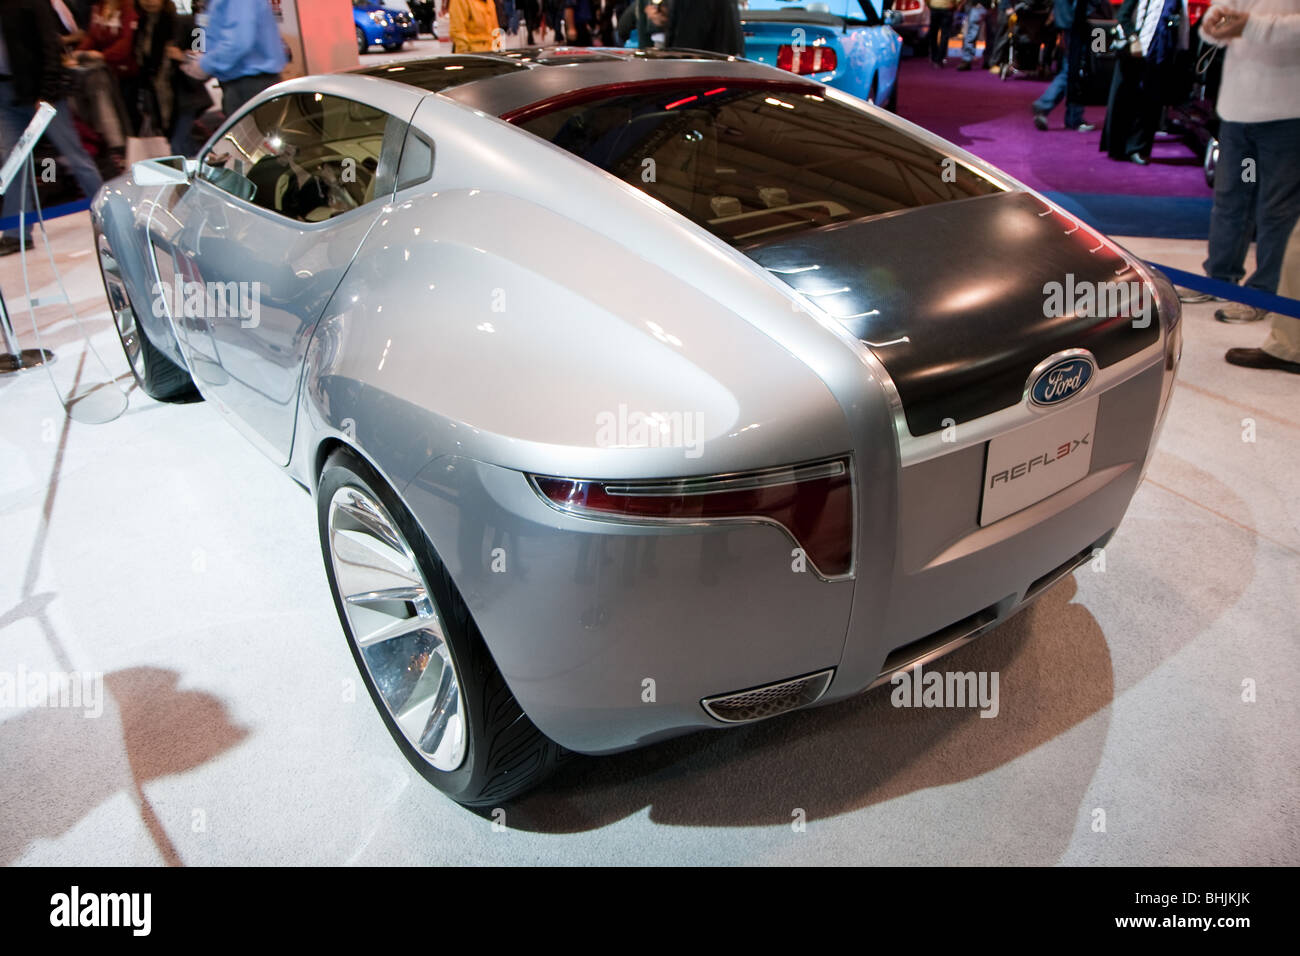 Ford Concept Car Stock Photo Alamy